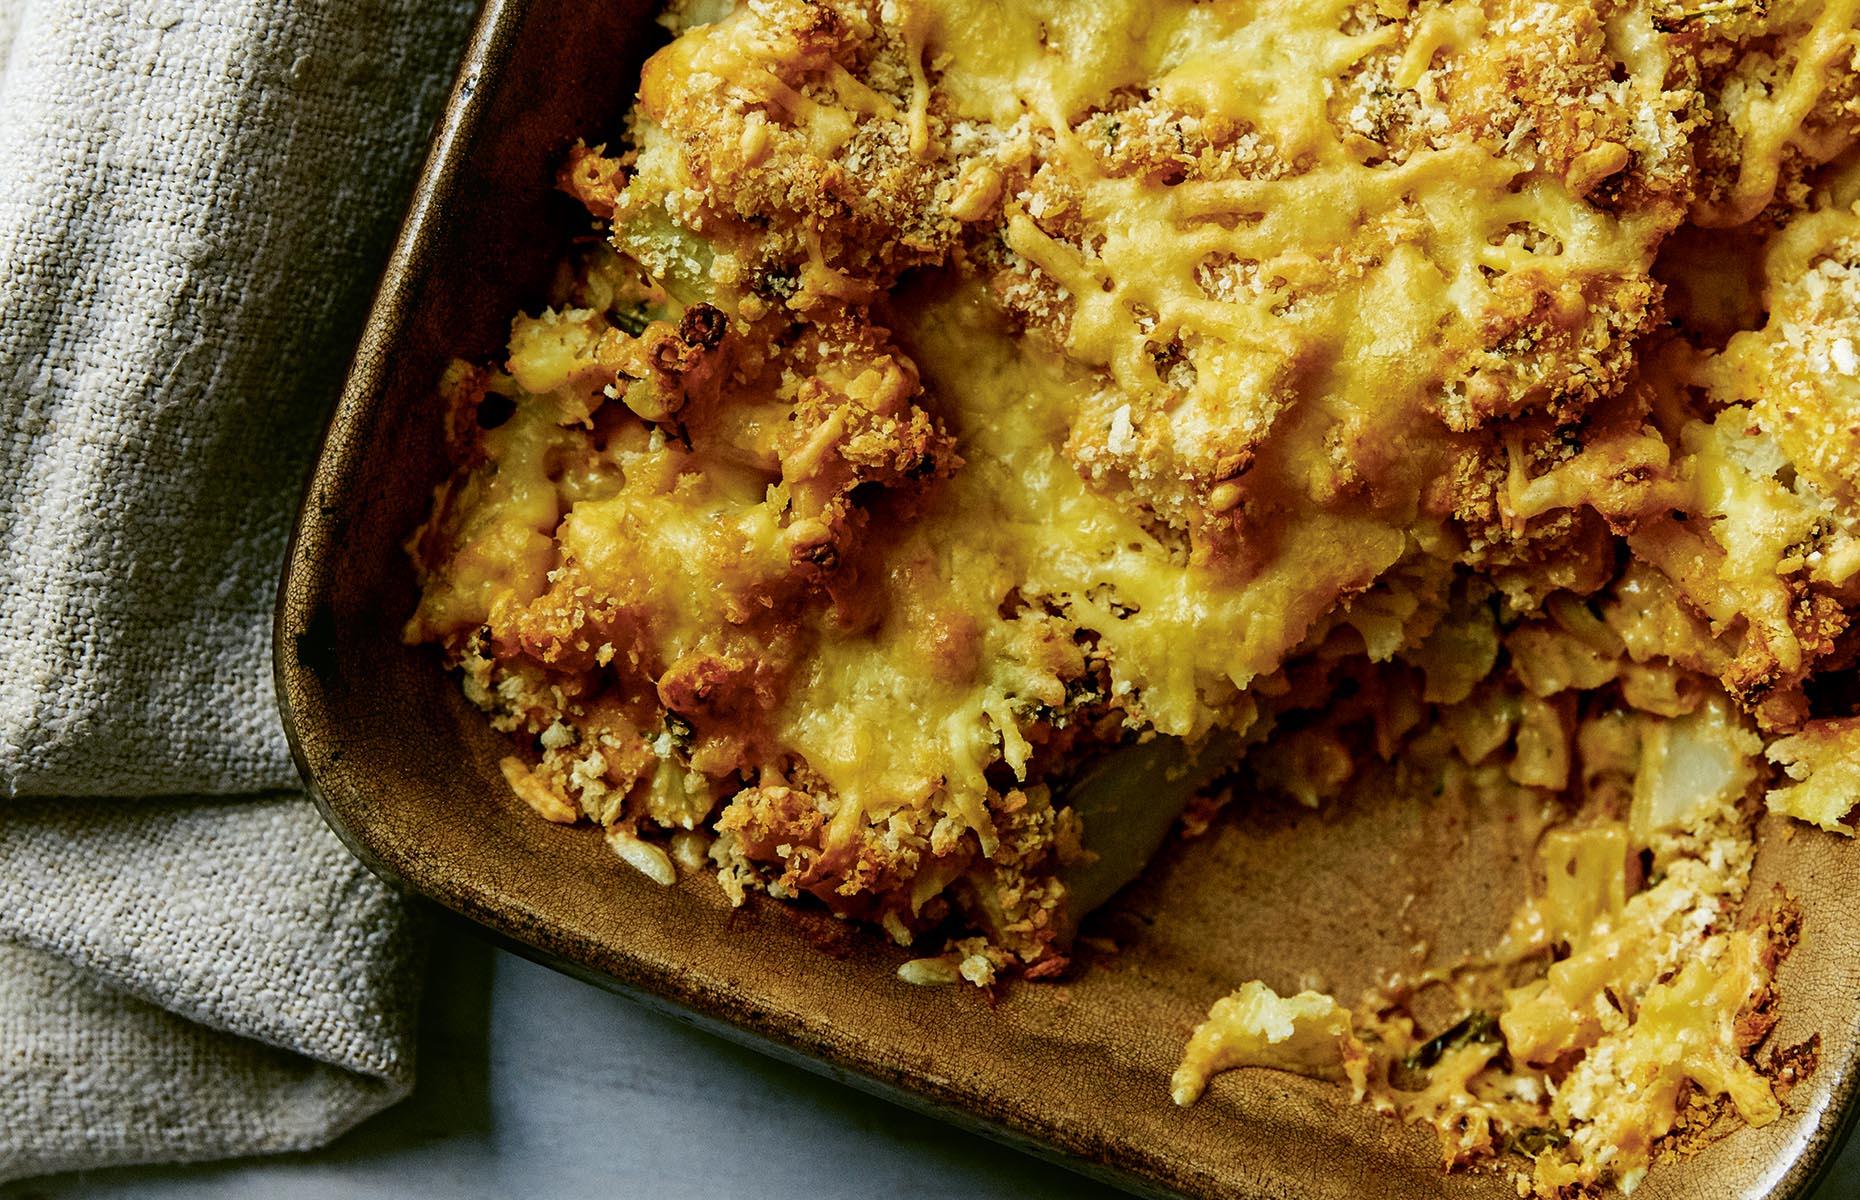 <p>Another option is to combine cauliflower cheese with mac 'n' cheese to make cauliflower mac 'n' cheese. You could also incorporate peas, potatoes, carrot or broccoli.</p>  <p><a href="https://www.lovefood.com/recipes/93562/macaroni-and-cauliflower-cheese-recipe"><strong>Get the recipe for cauliflower mac 'n' cheese here</strong></a></p>